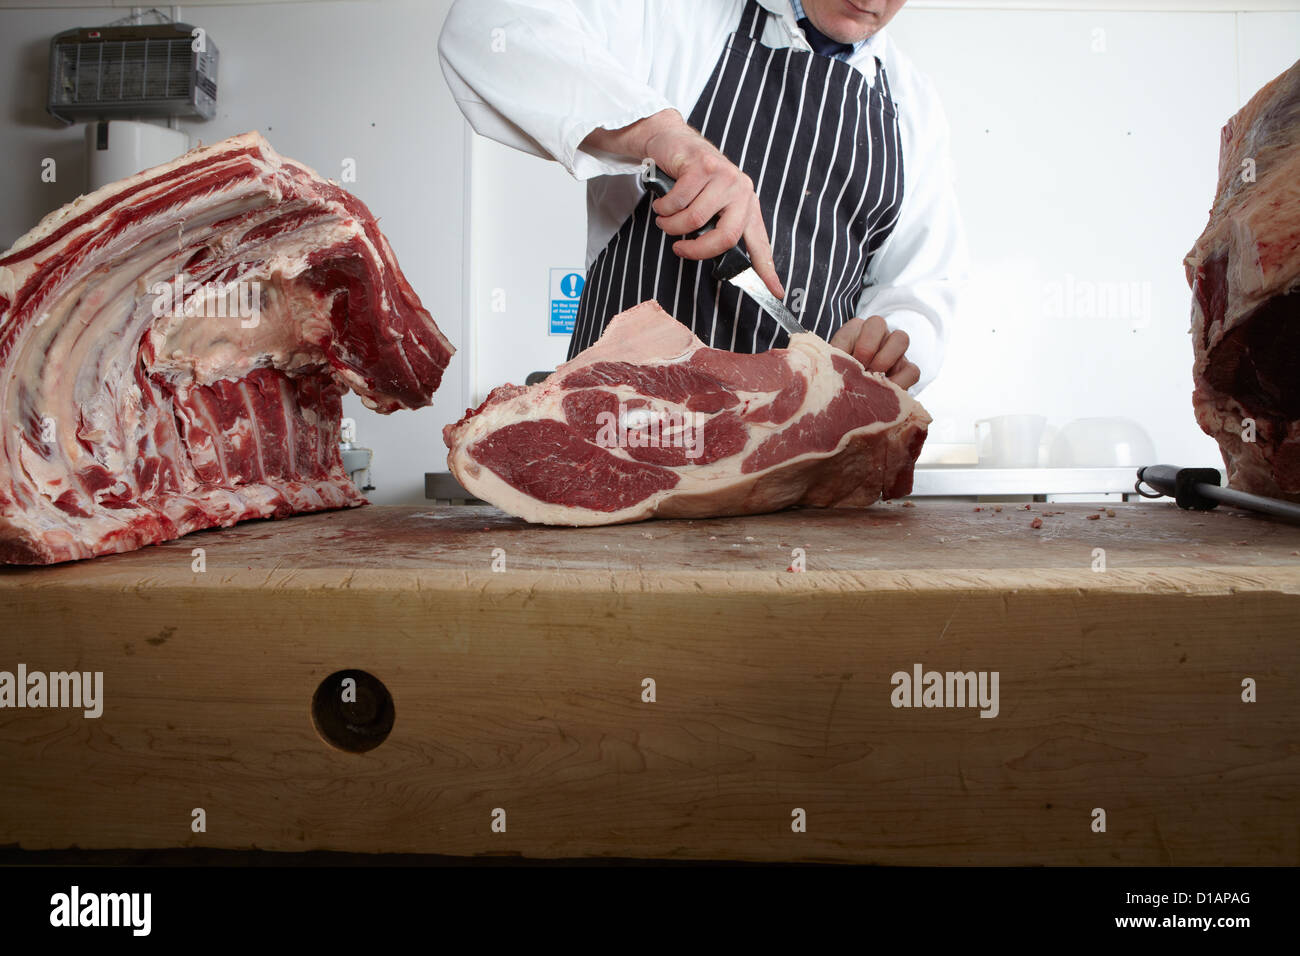 butcher cutting meat Stock Photo